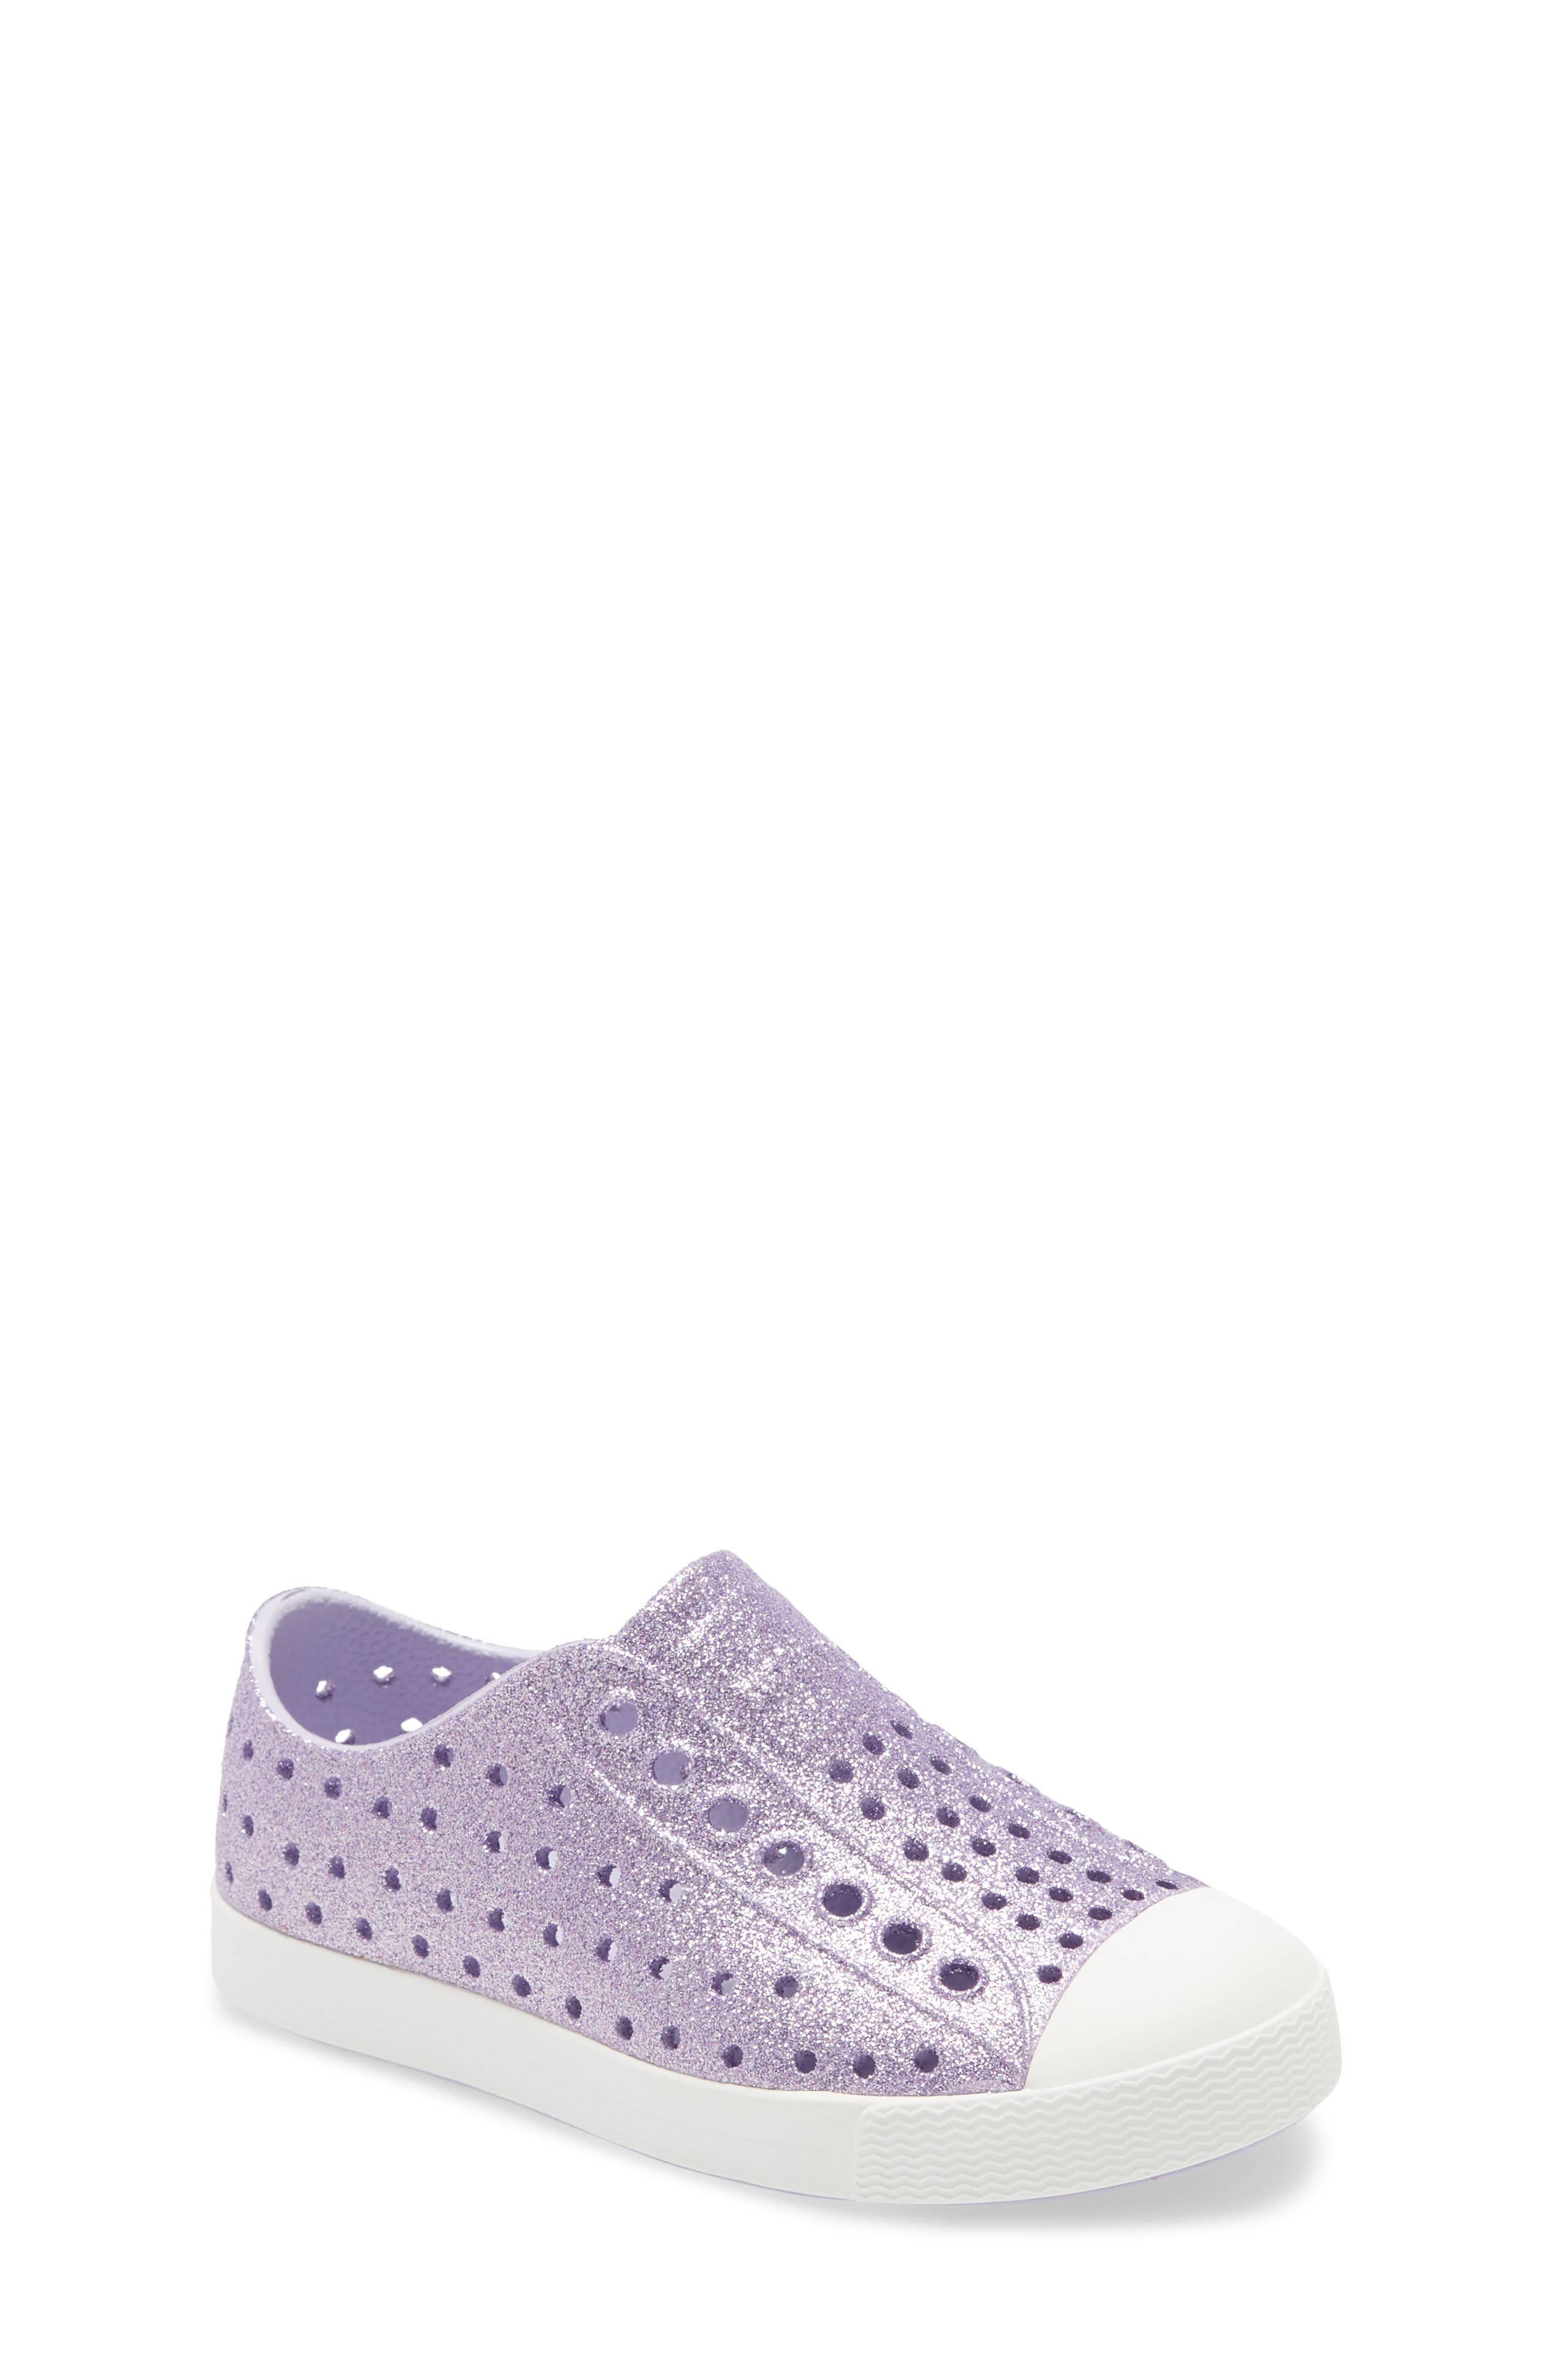 purple shoes for girls